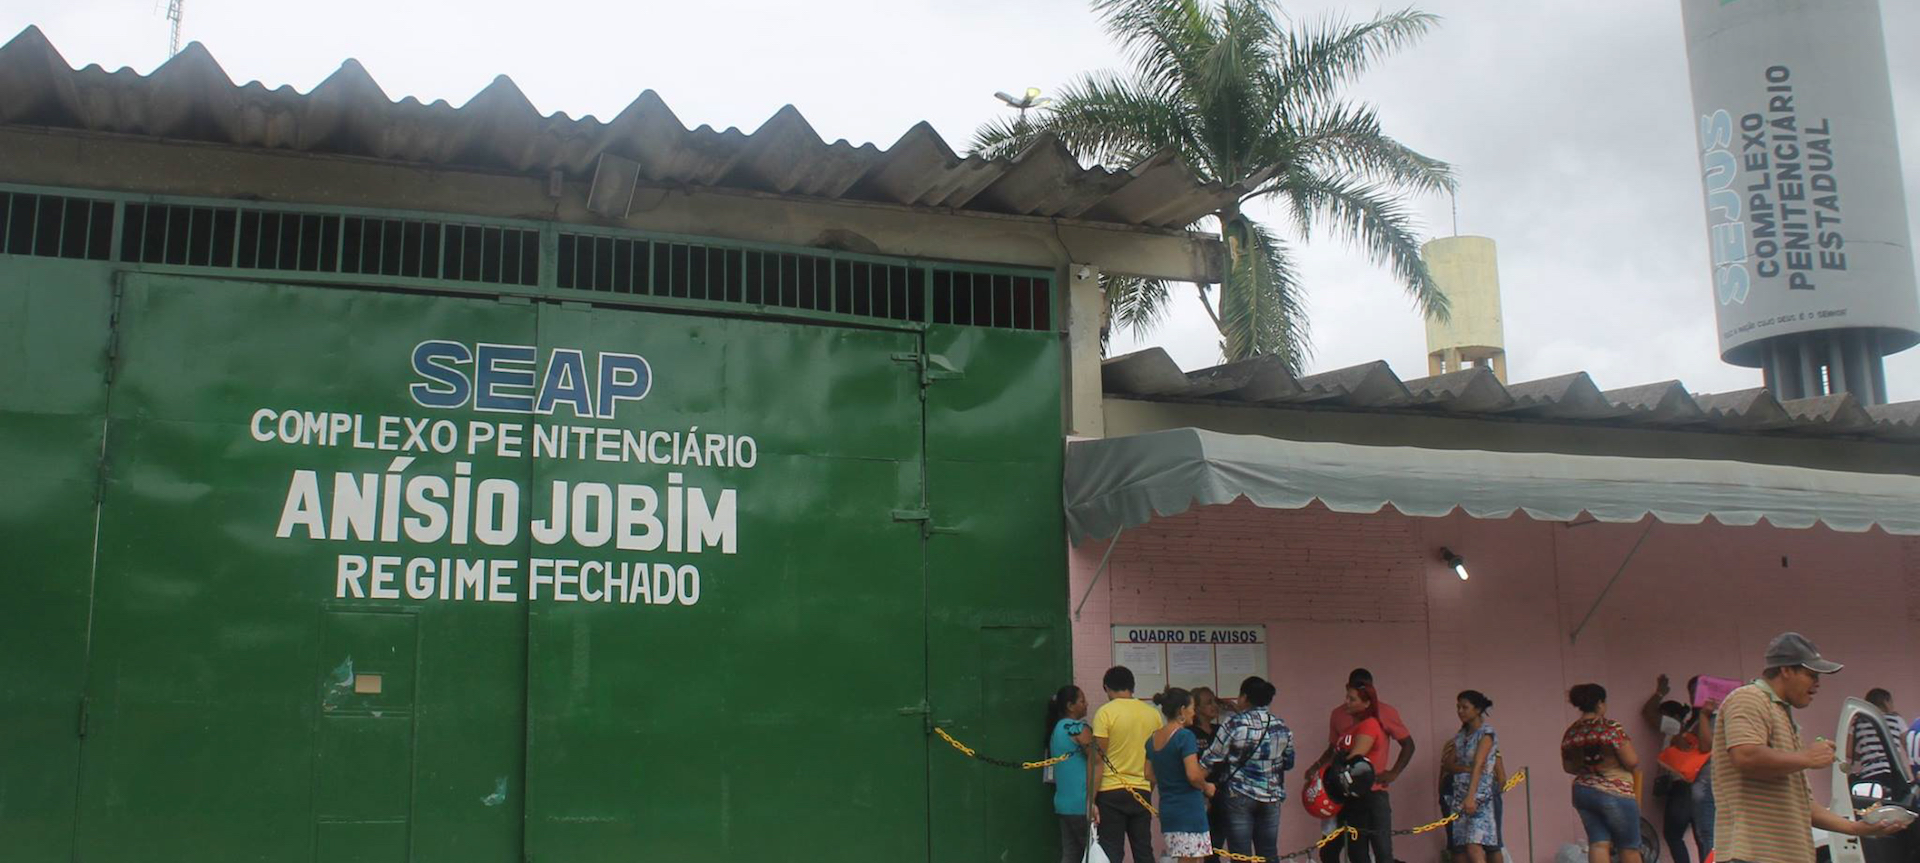 Manaus, Brazil,A fight between inmates at the Compej prison complex in Manaus left fifteen people dead